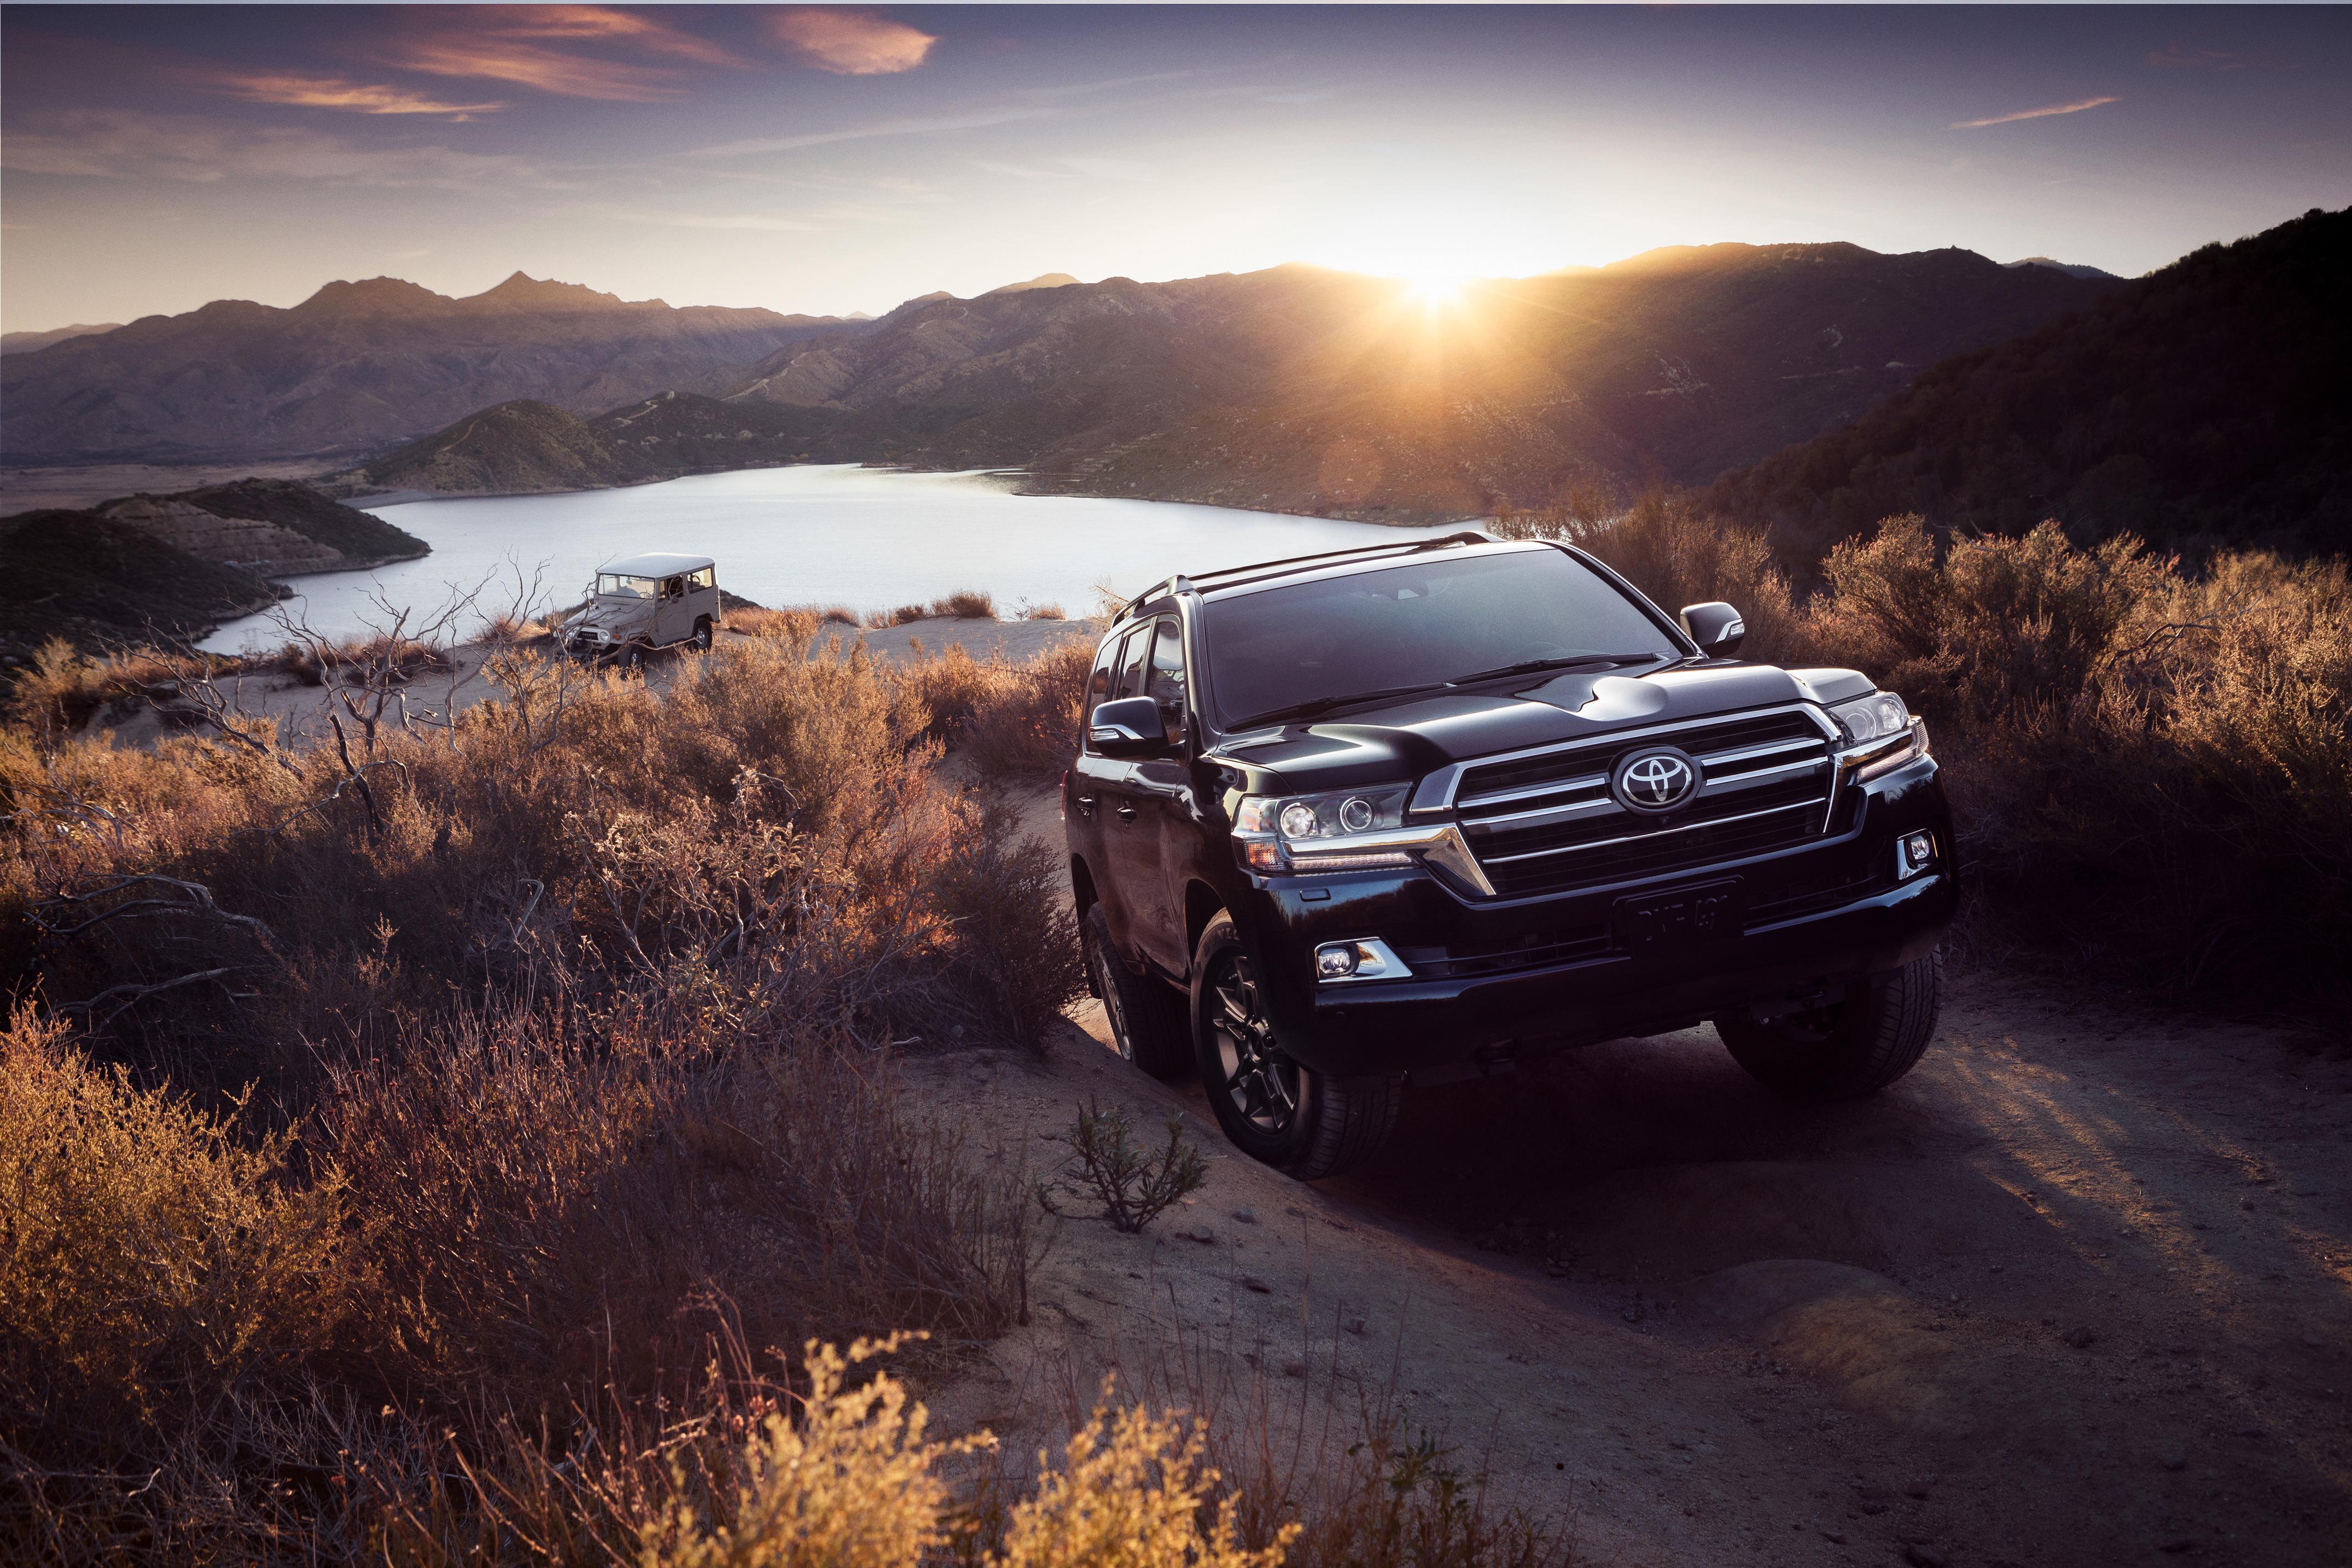 Toyota Land Cruiser Heritage Edition Picture, Photo